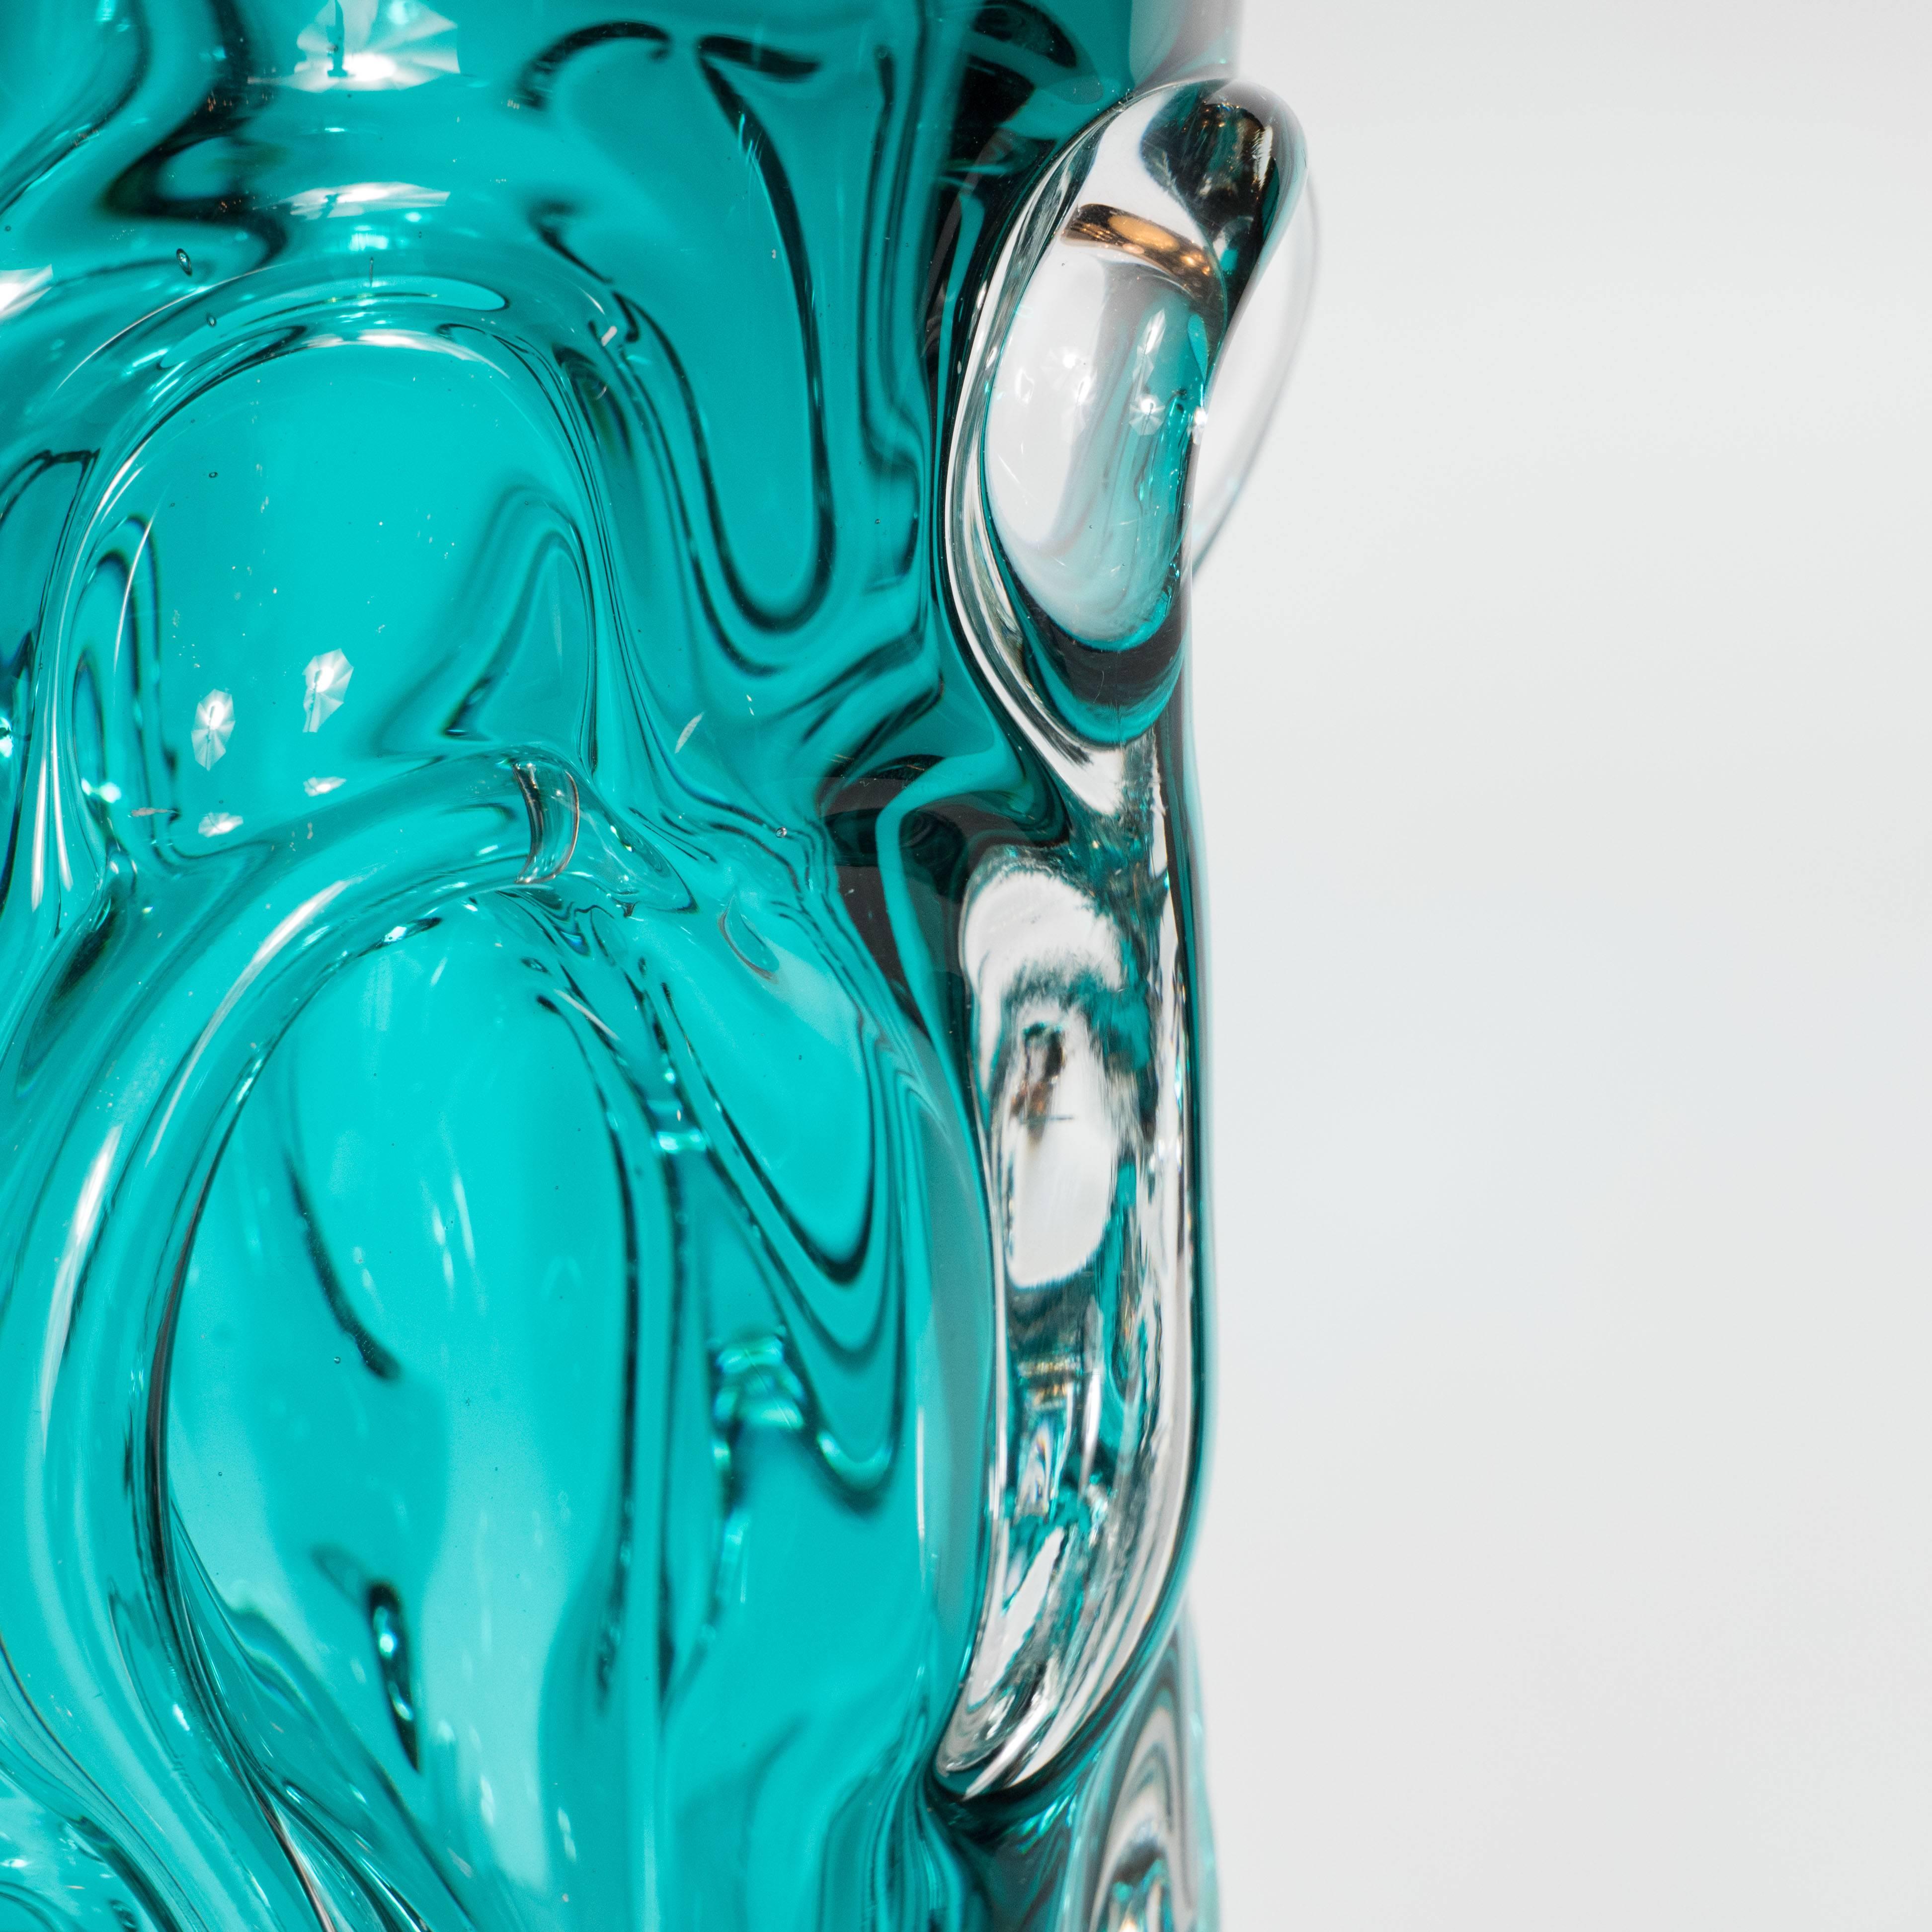 Murano Glass Midcentury Sculptural Handblown Murano Vase in Translucent and Teal Glass